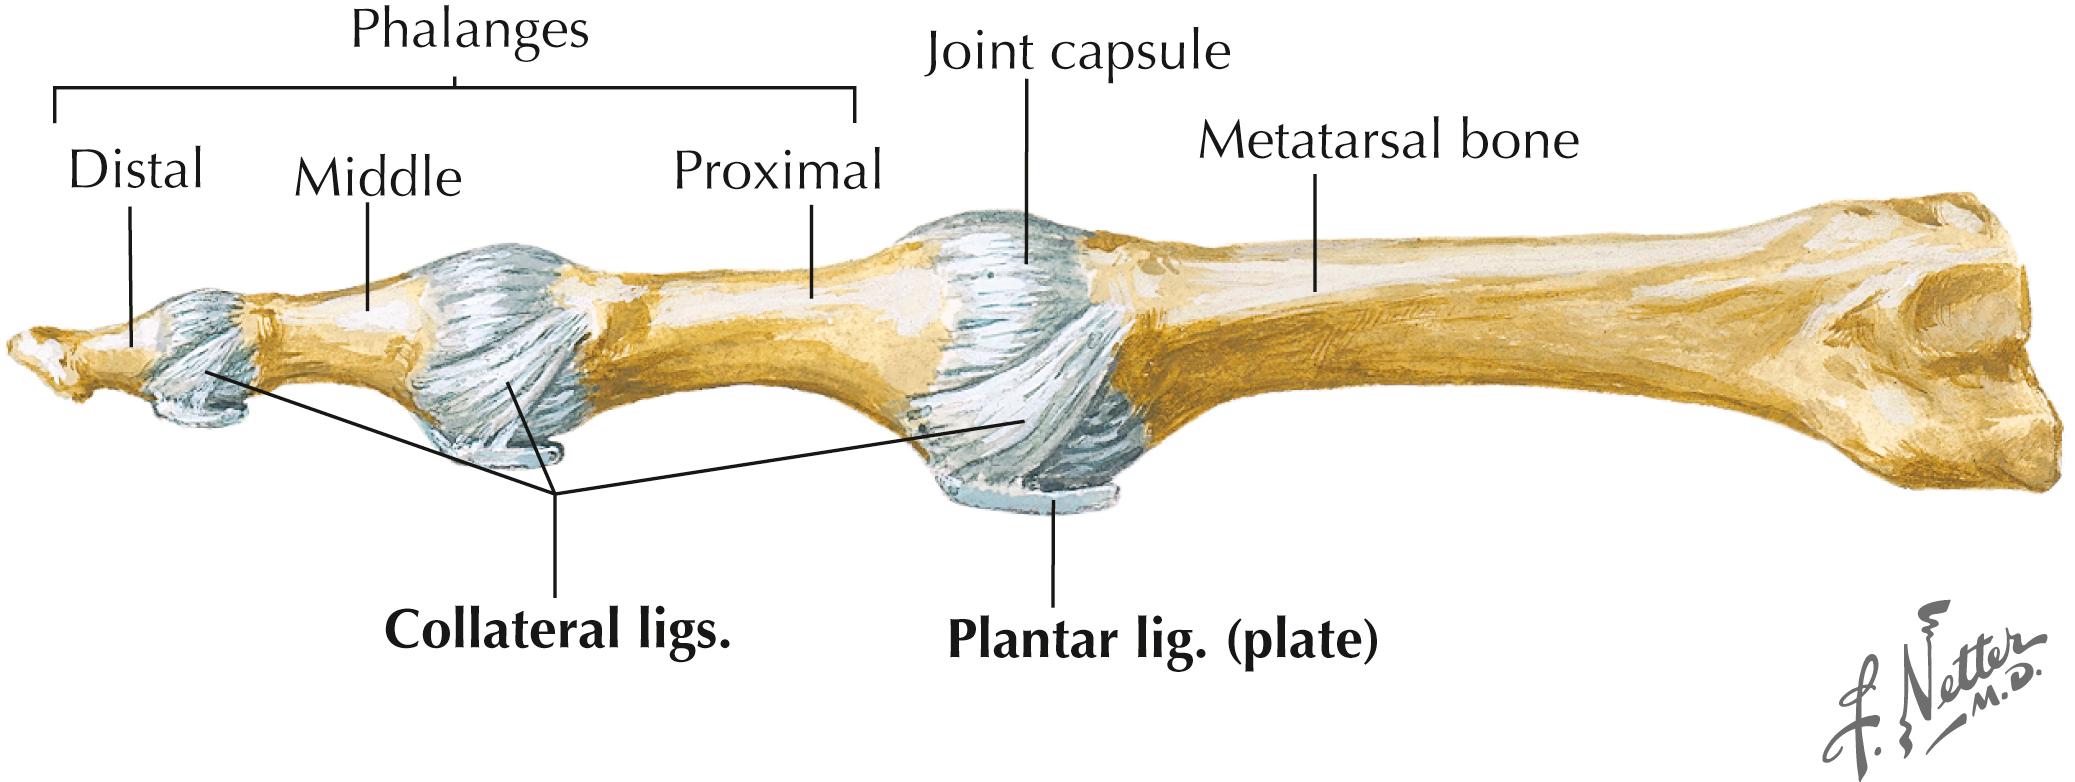 Figure 8-7, Capsules and ligaments of metatarsophalangeal and interphalangeal joints: lateral view.